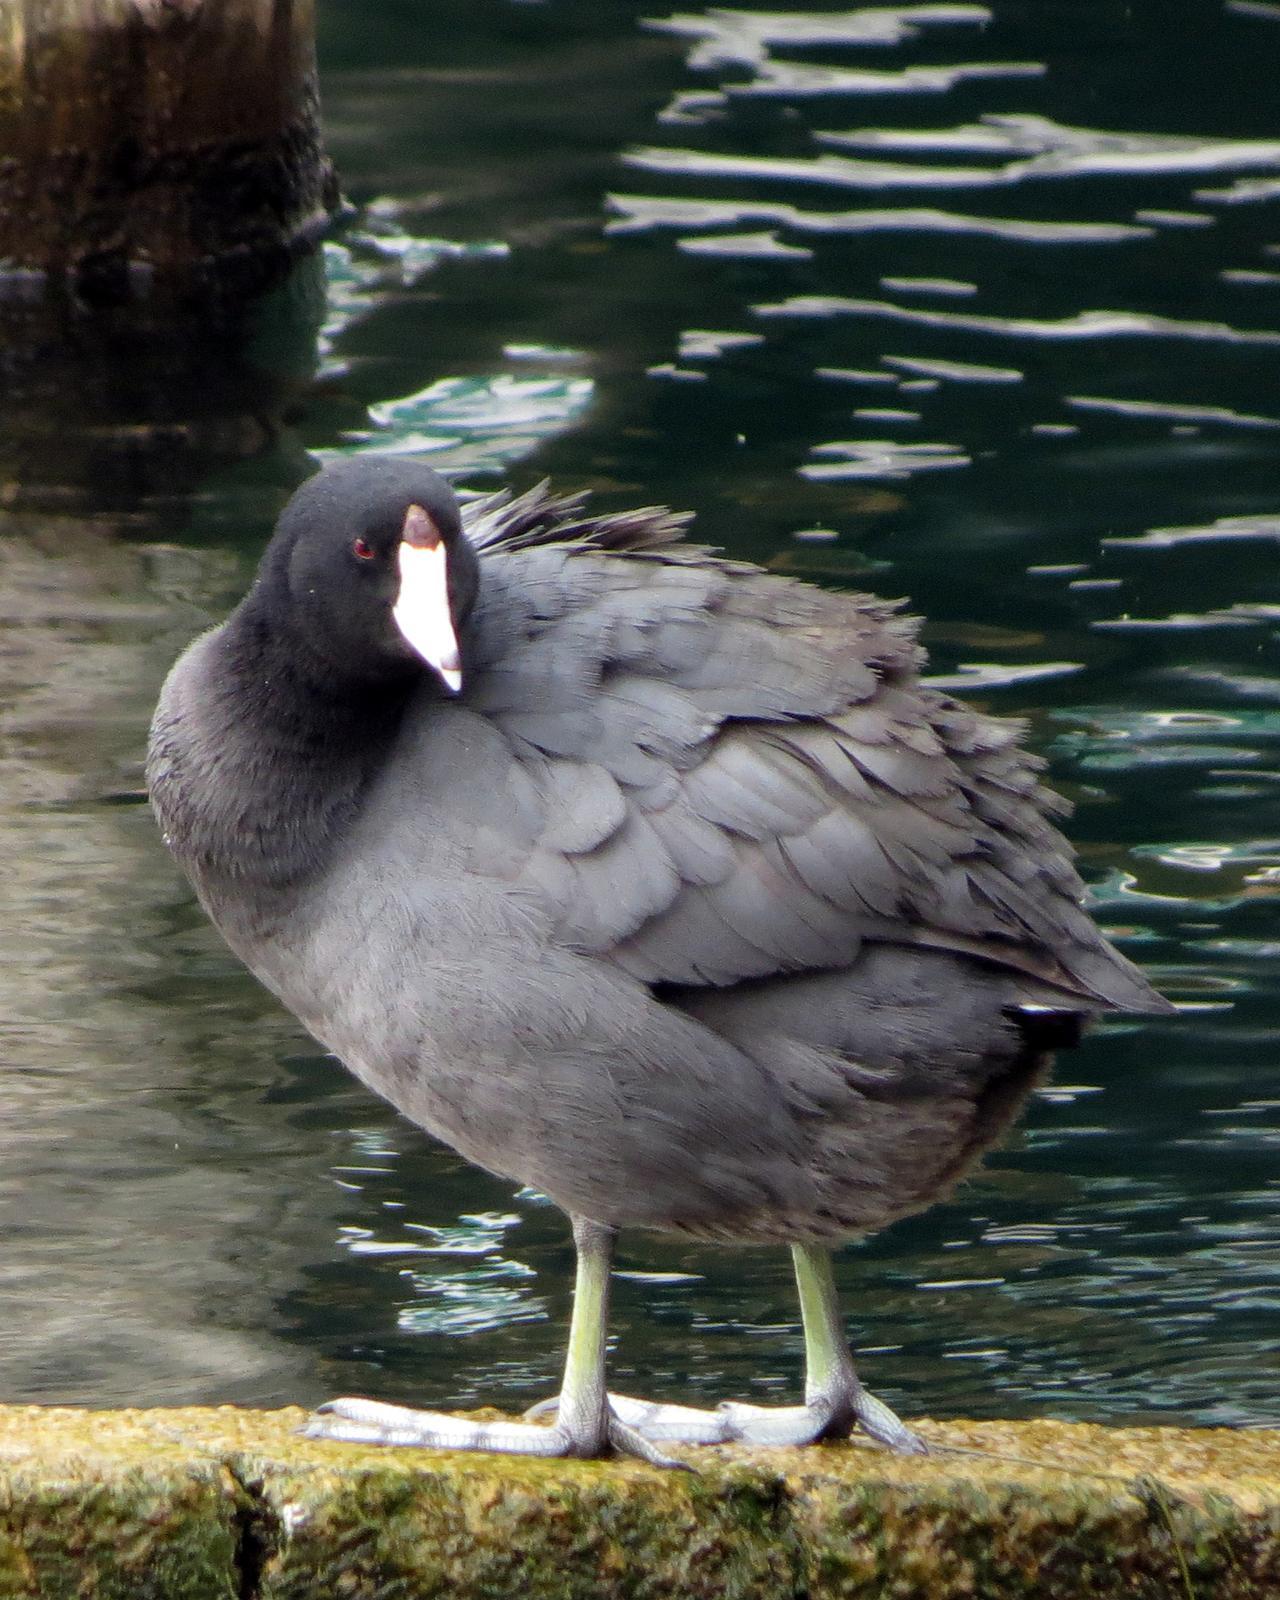 American Coot Photo by Anna E. Wittmer